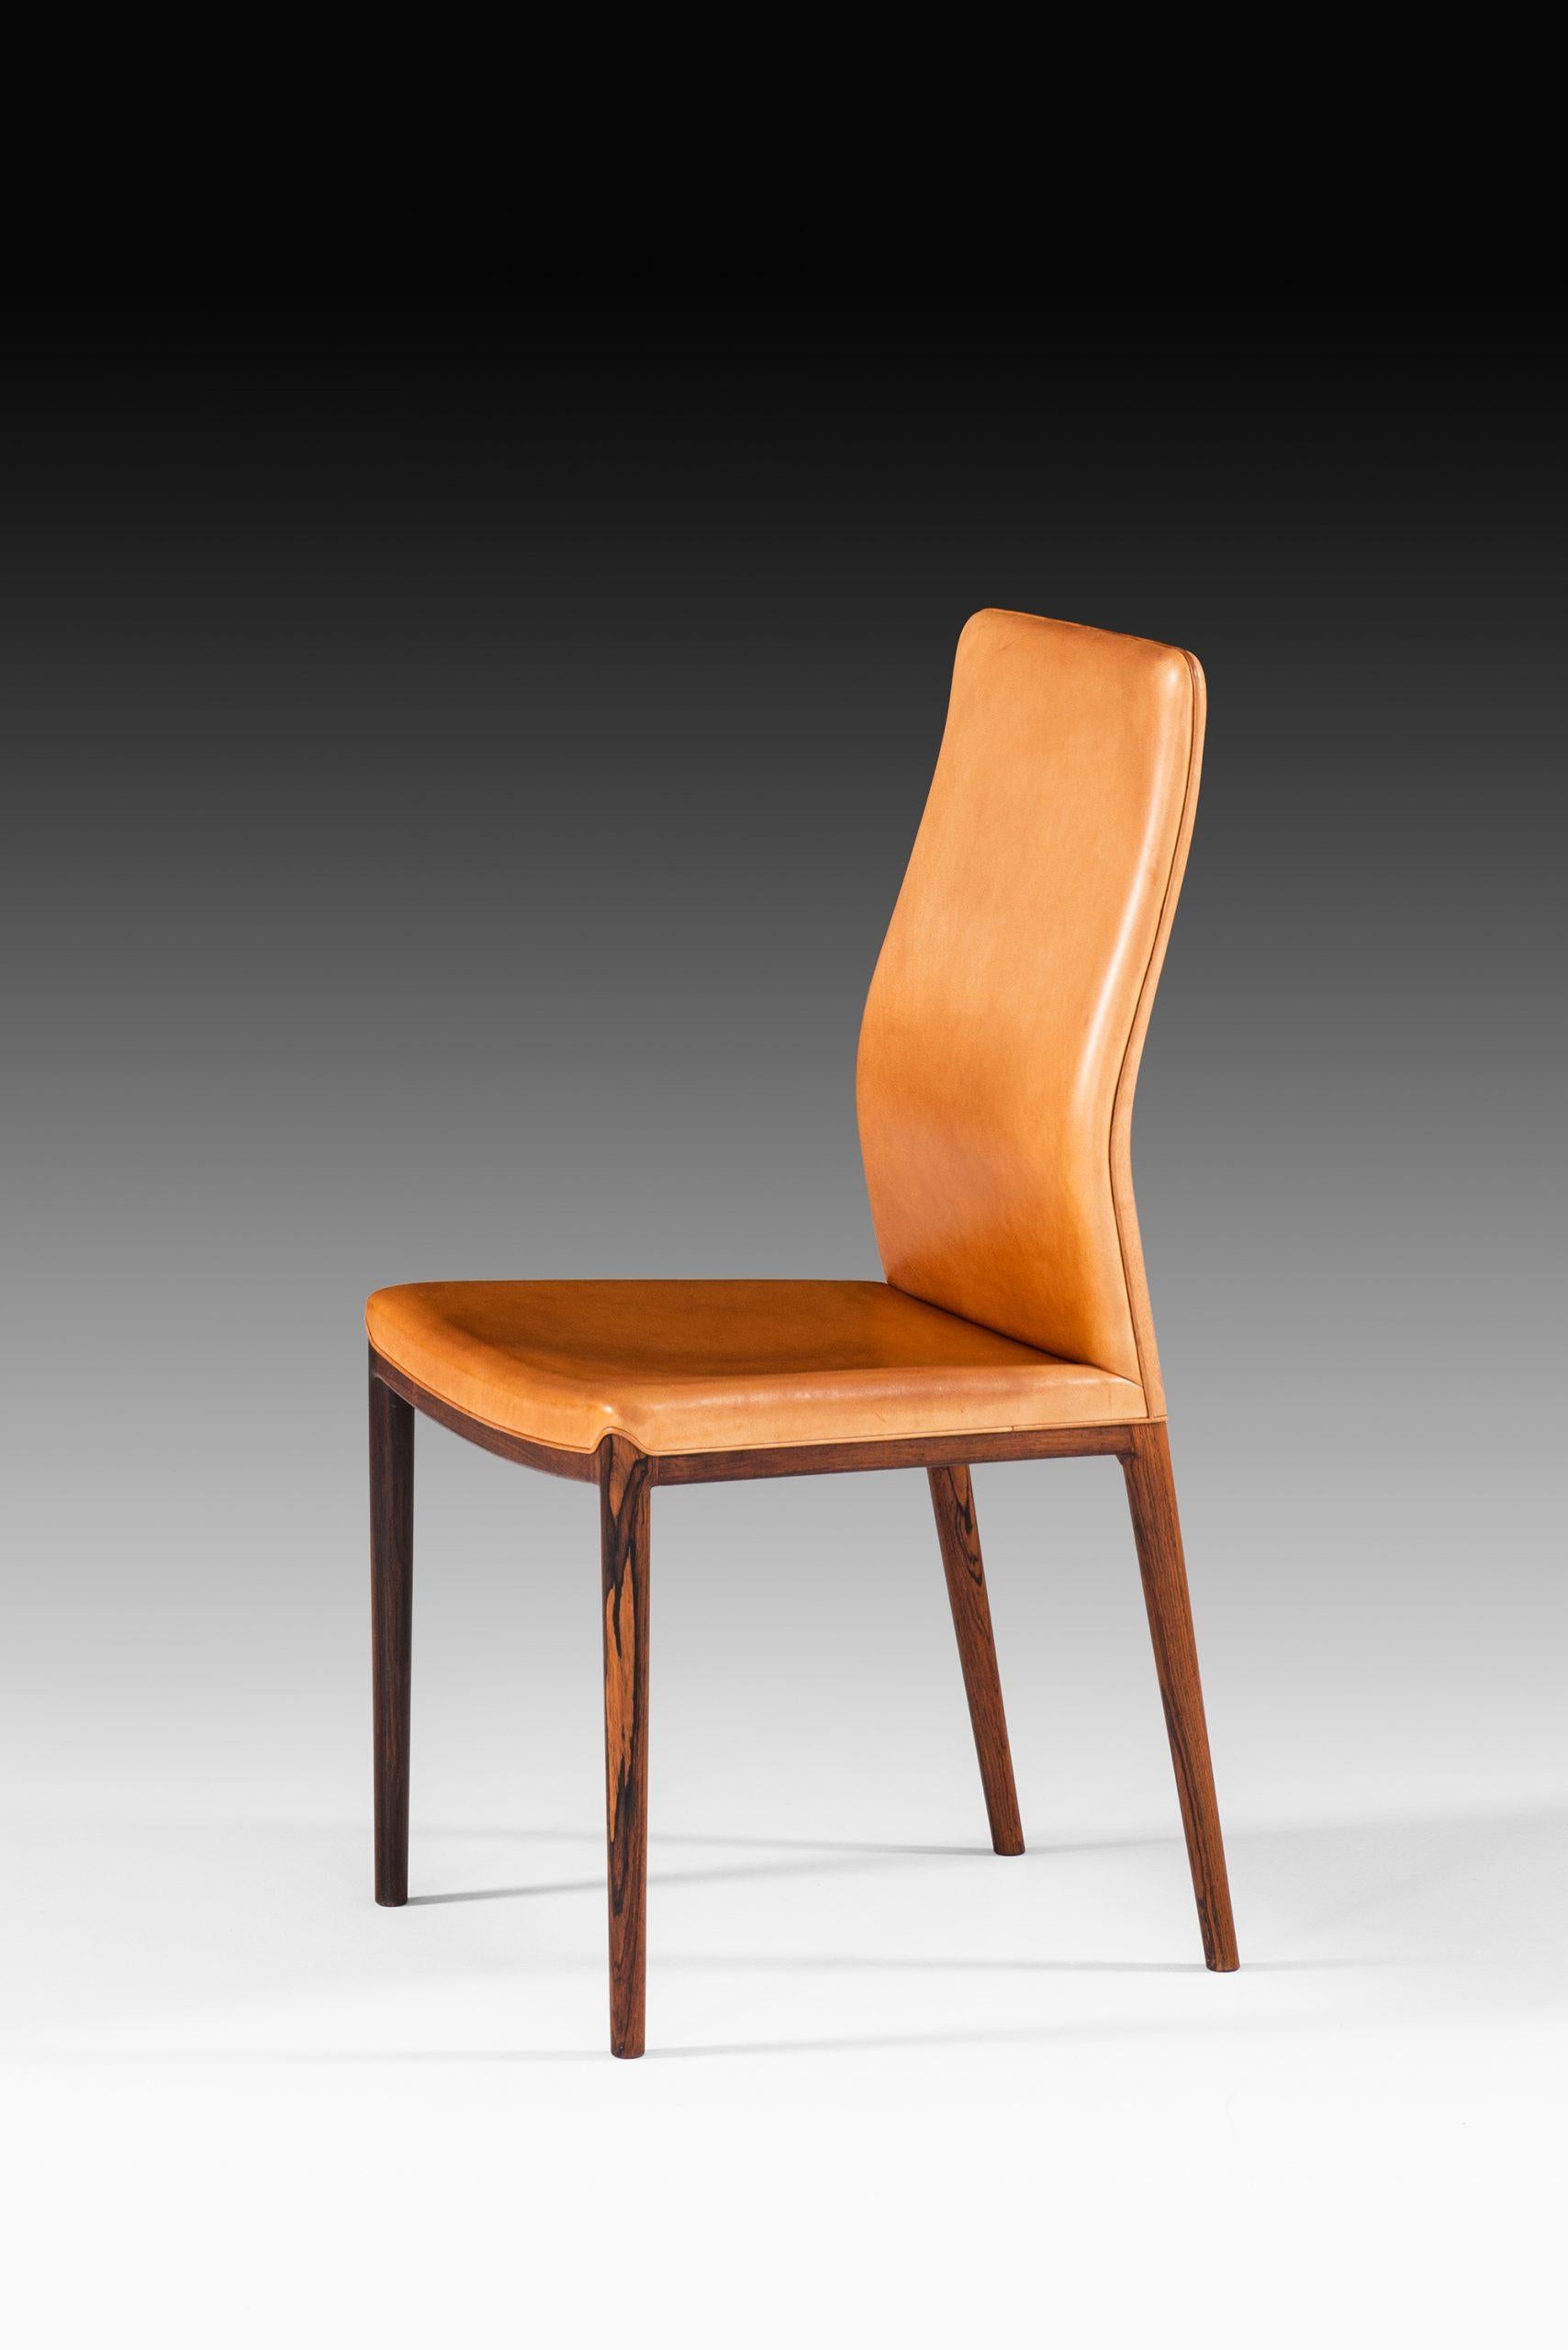 Mid-20th Century Helge Vestergaard Jensen Dining Chairs Produced by P. Jensen & Co. Cabinetmakers For Sale